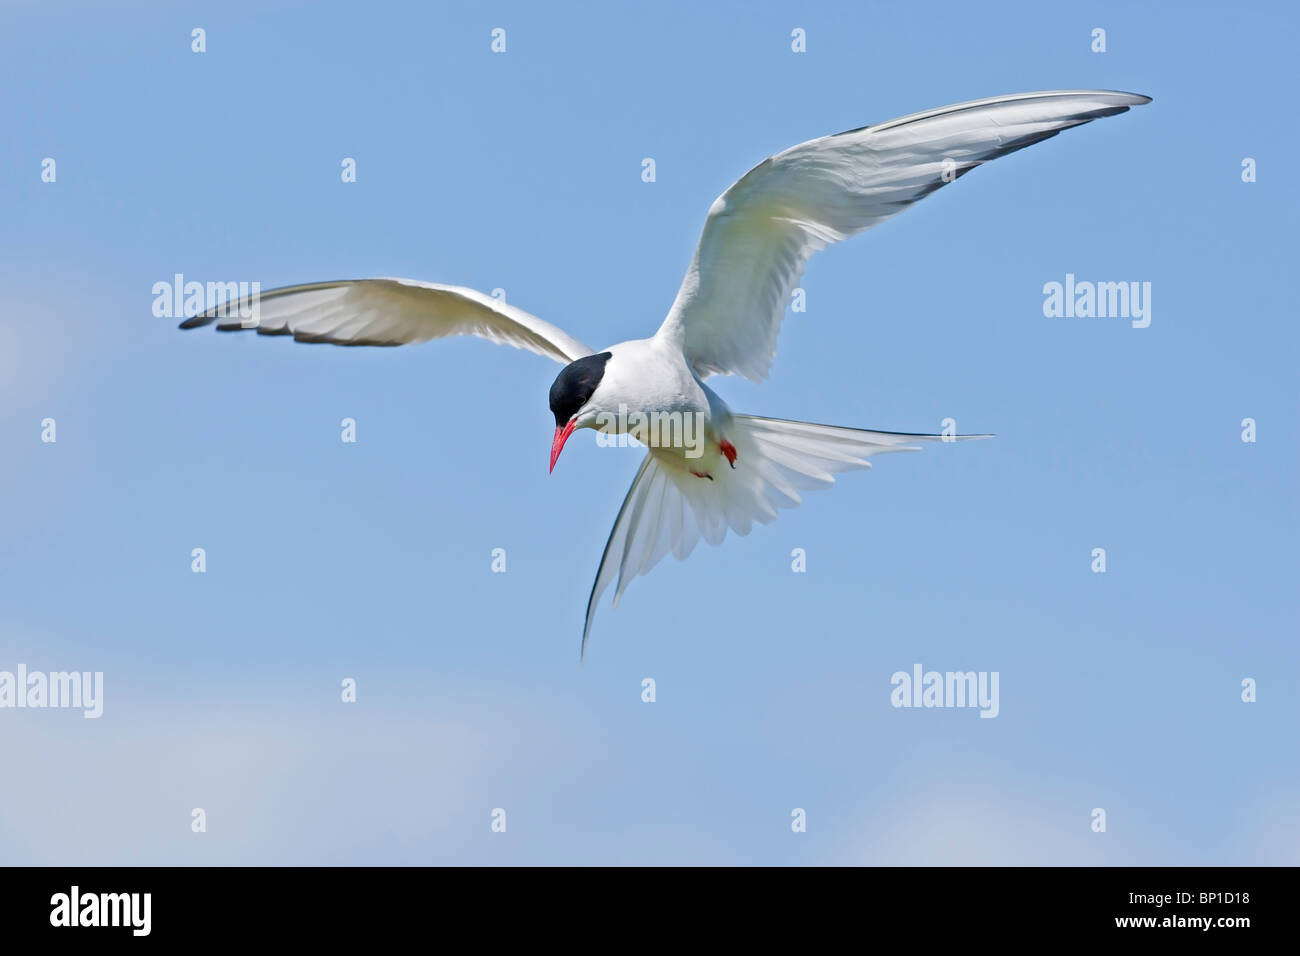 Arctic Tern hovering with a blue sky and white cloud background. Stock Photo